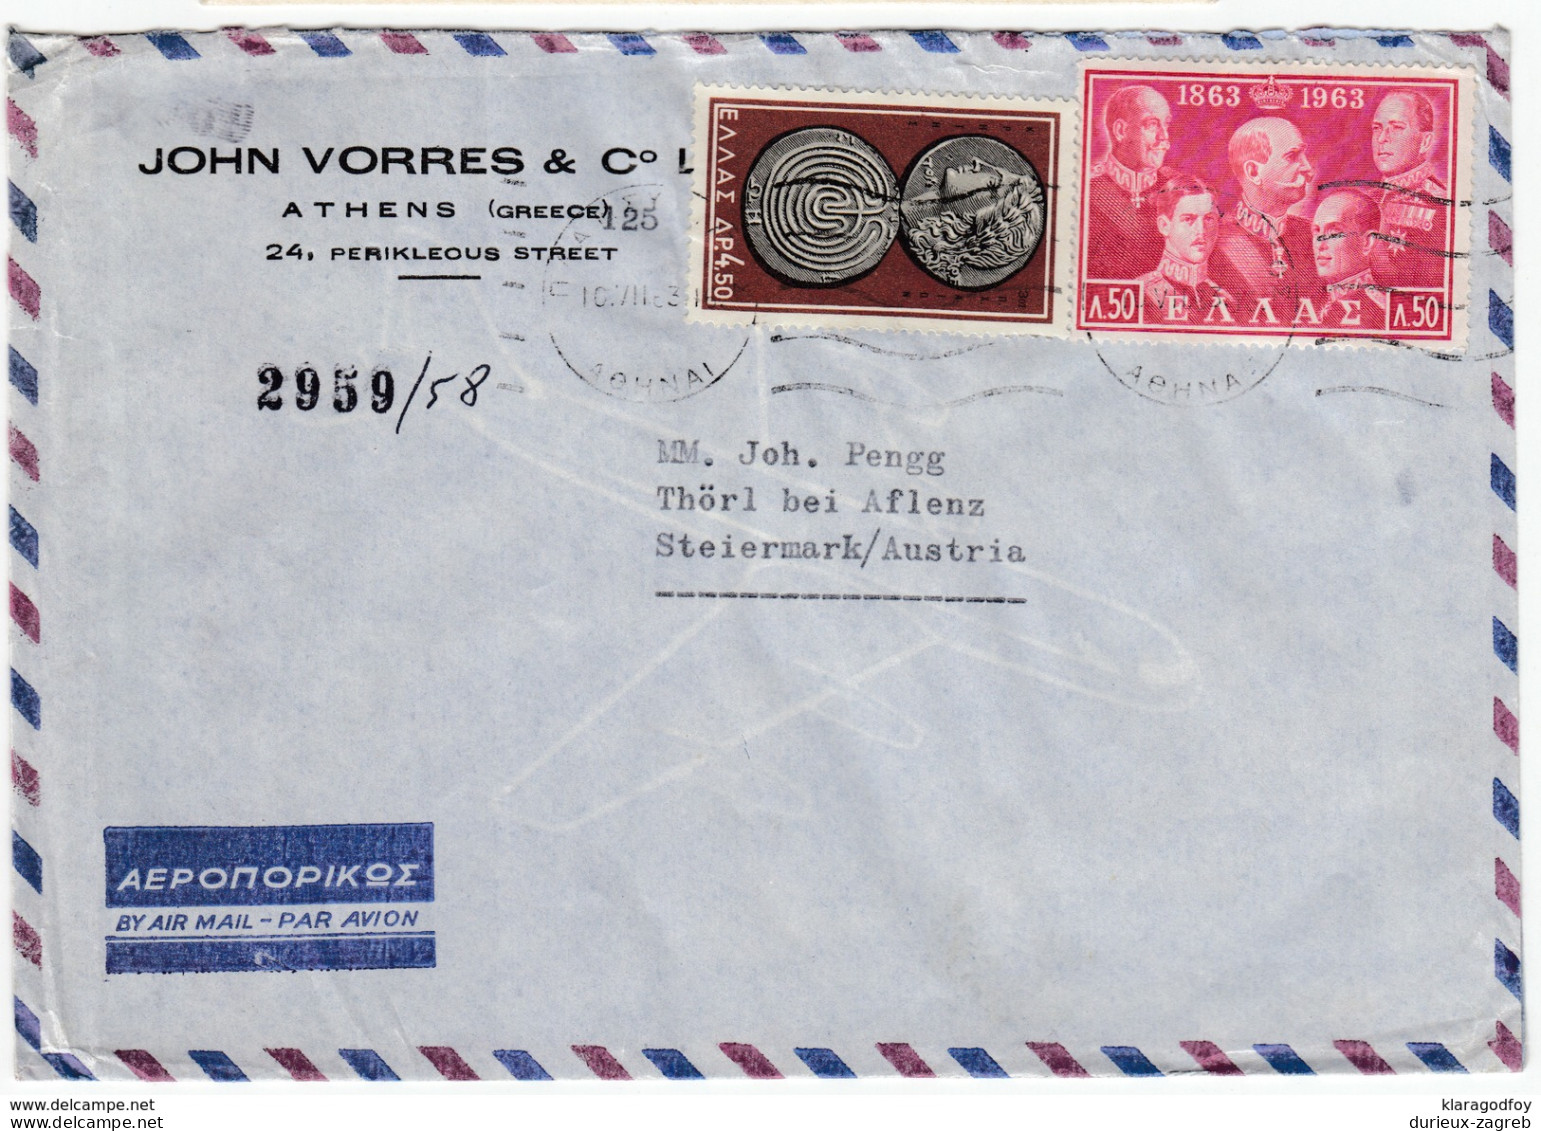 John Vorres company 6 air mail letters cover travelled 1960s Athens to Thörl bei Aflenz bb161210